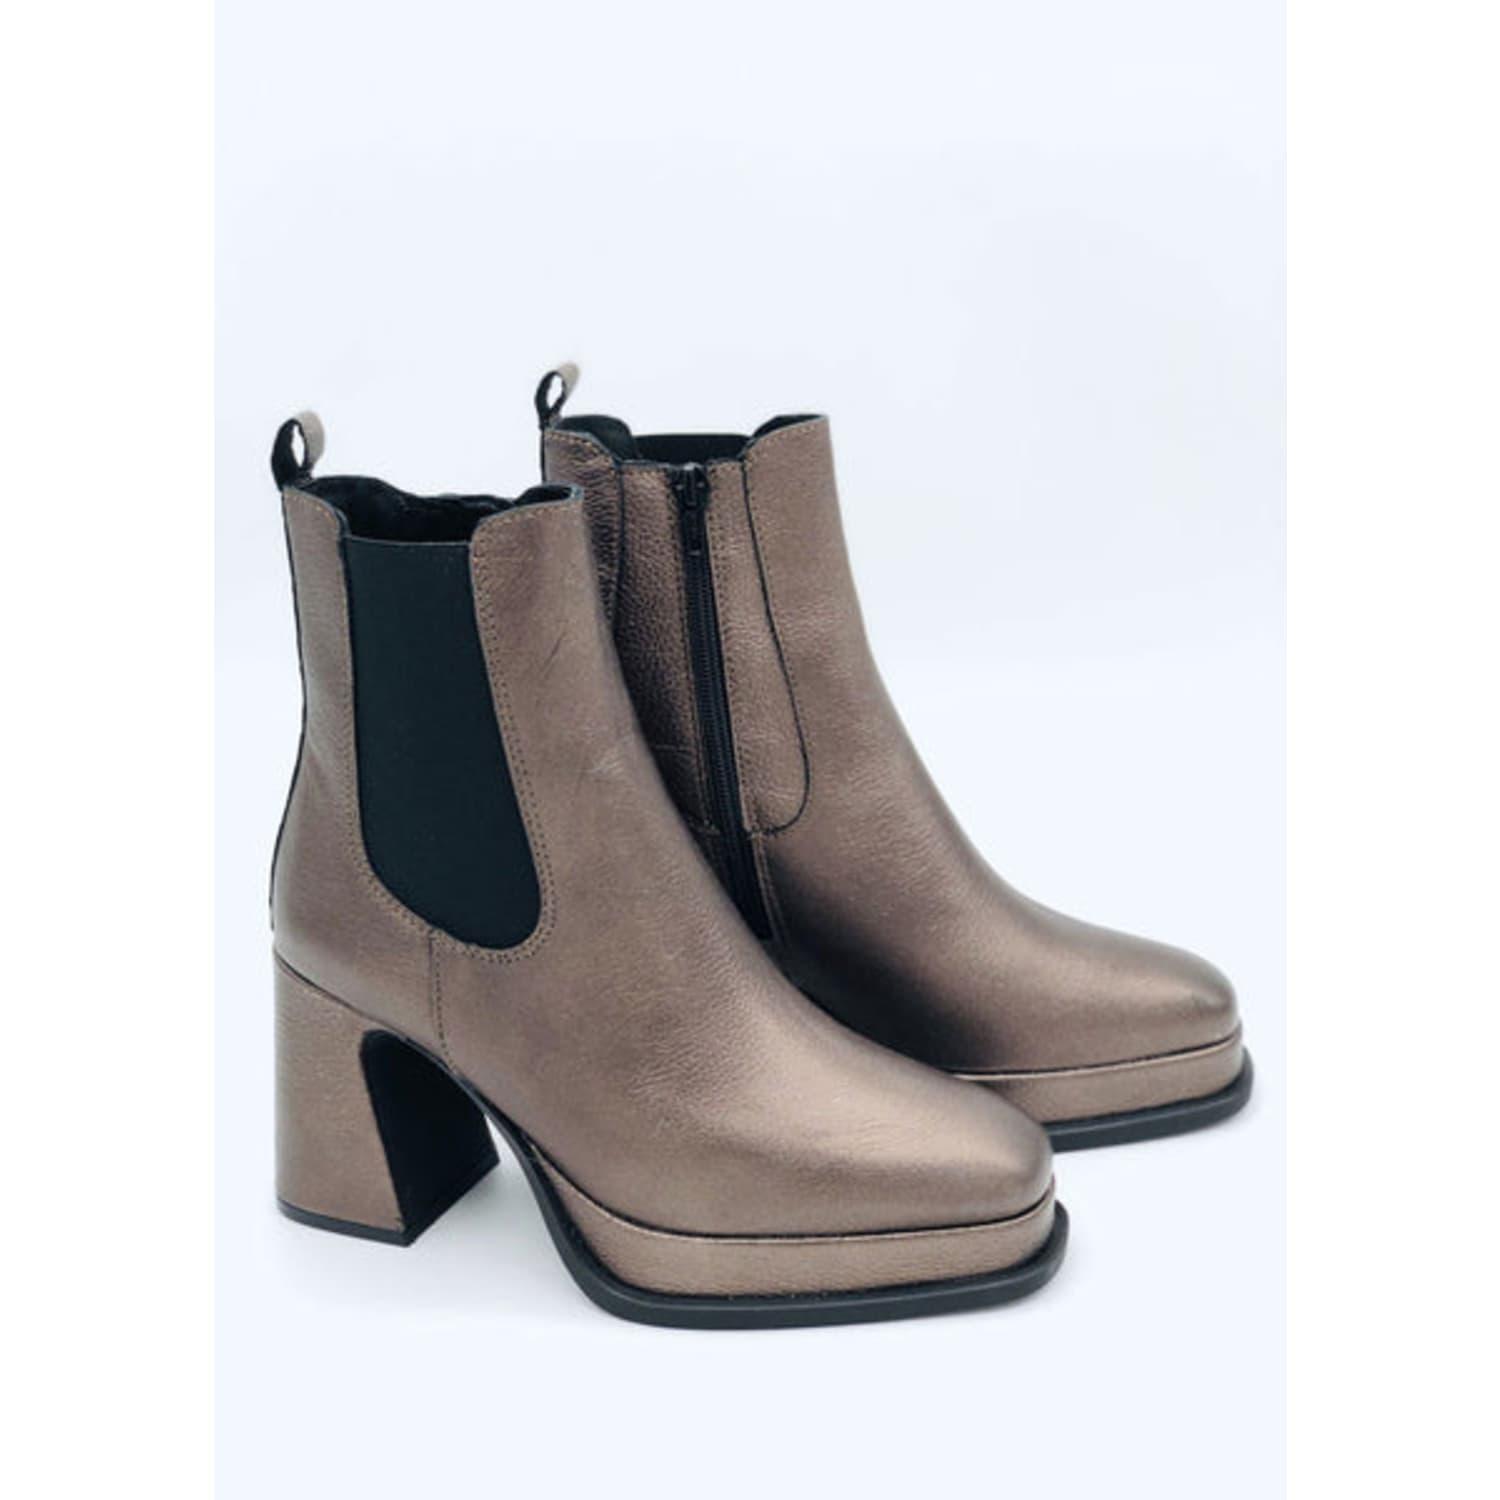 Alpe Platform Ankle Boots in Gray | Lyst